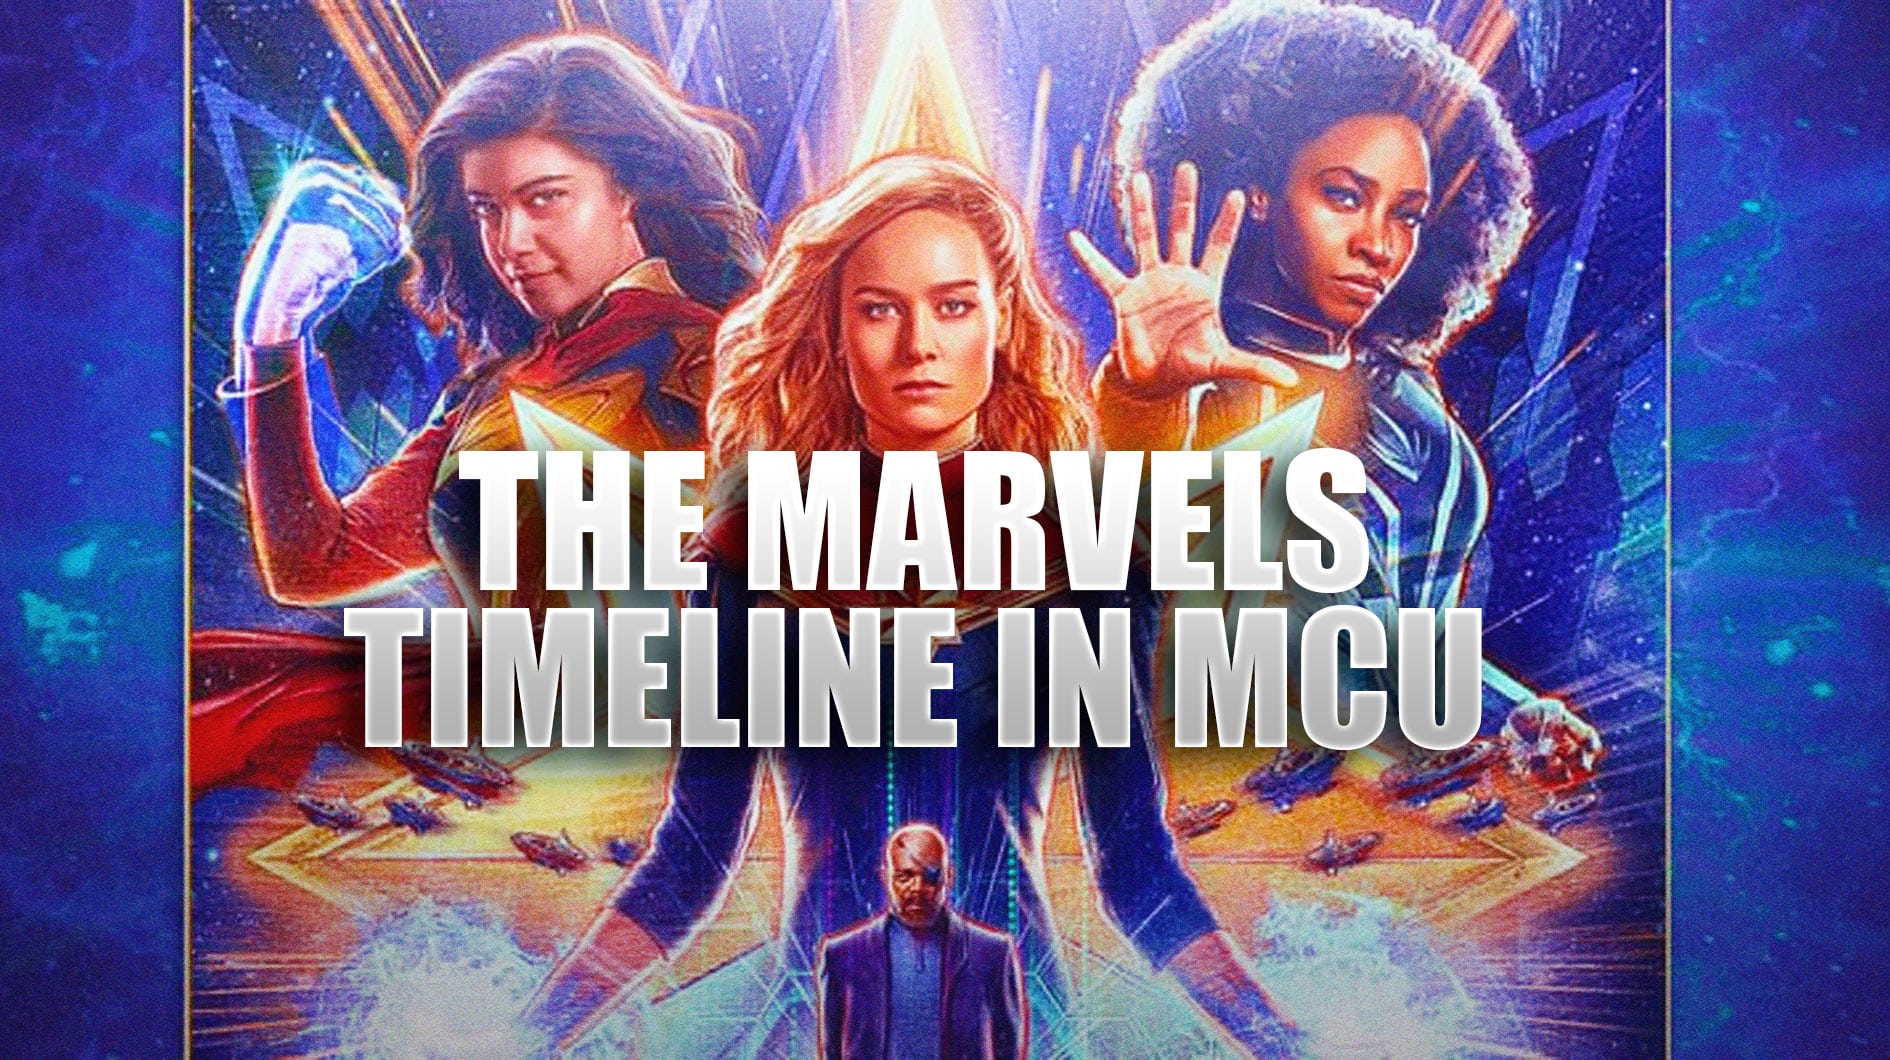 The Marvels timeline in MCU